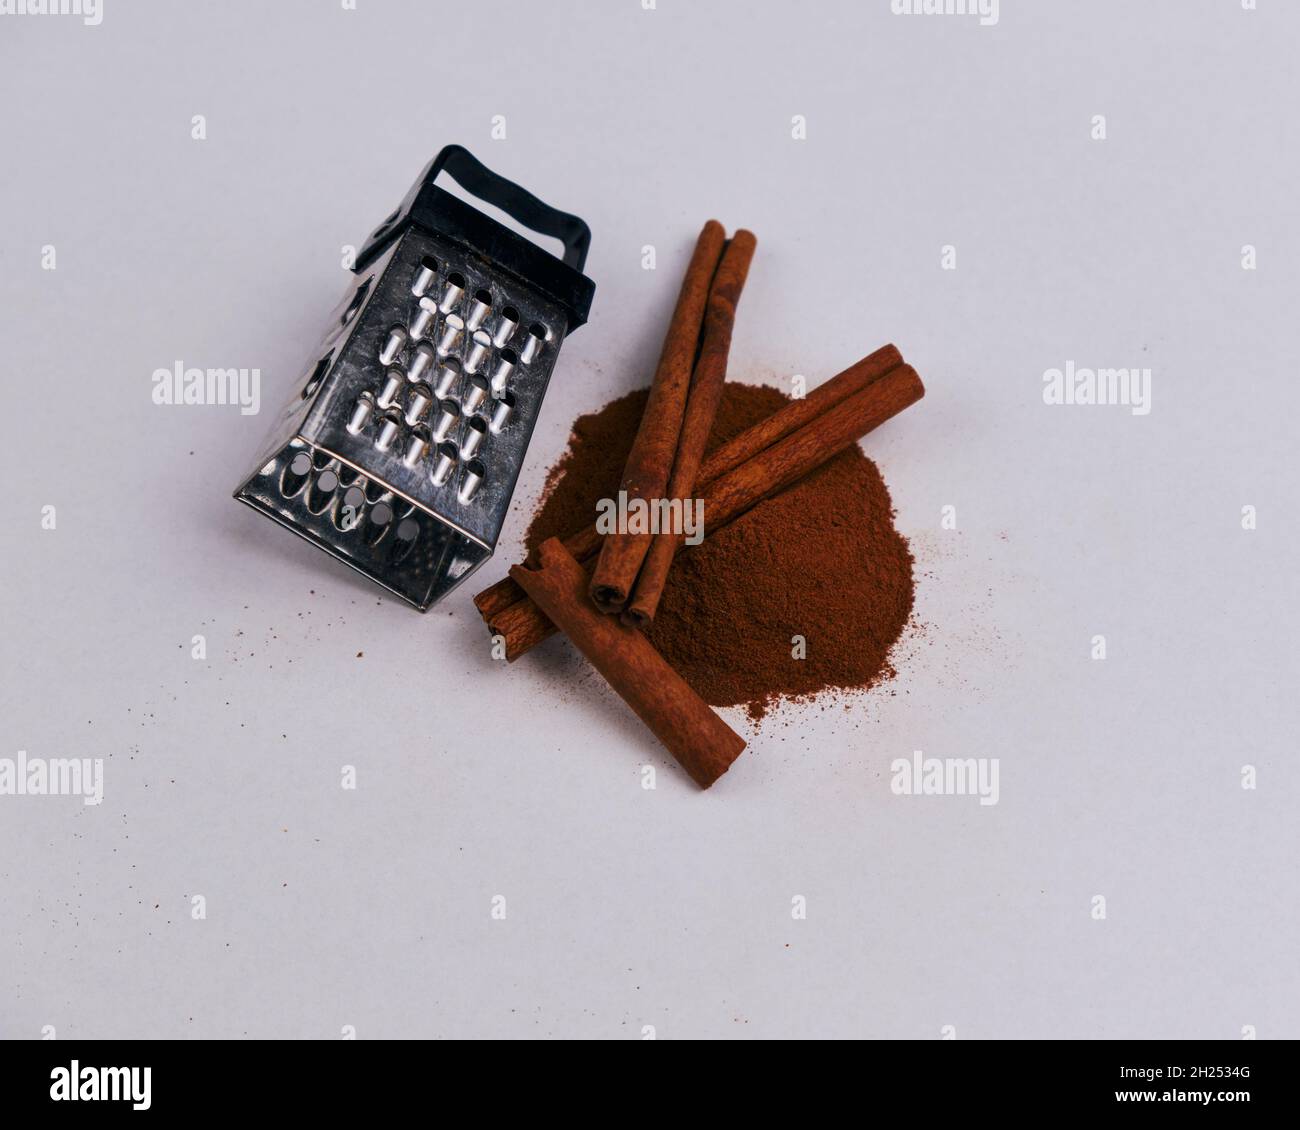 https://c8.alamy.com/comp/2H2534G/a-small-grater-with-cinnamon-sticks-and-powder-isolated-on-a-white-background-2H2534G.jpg